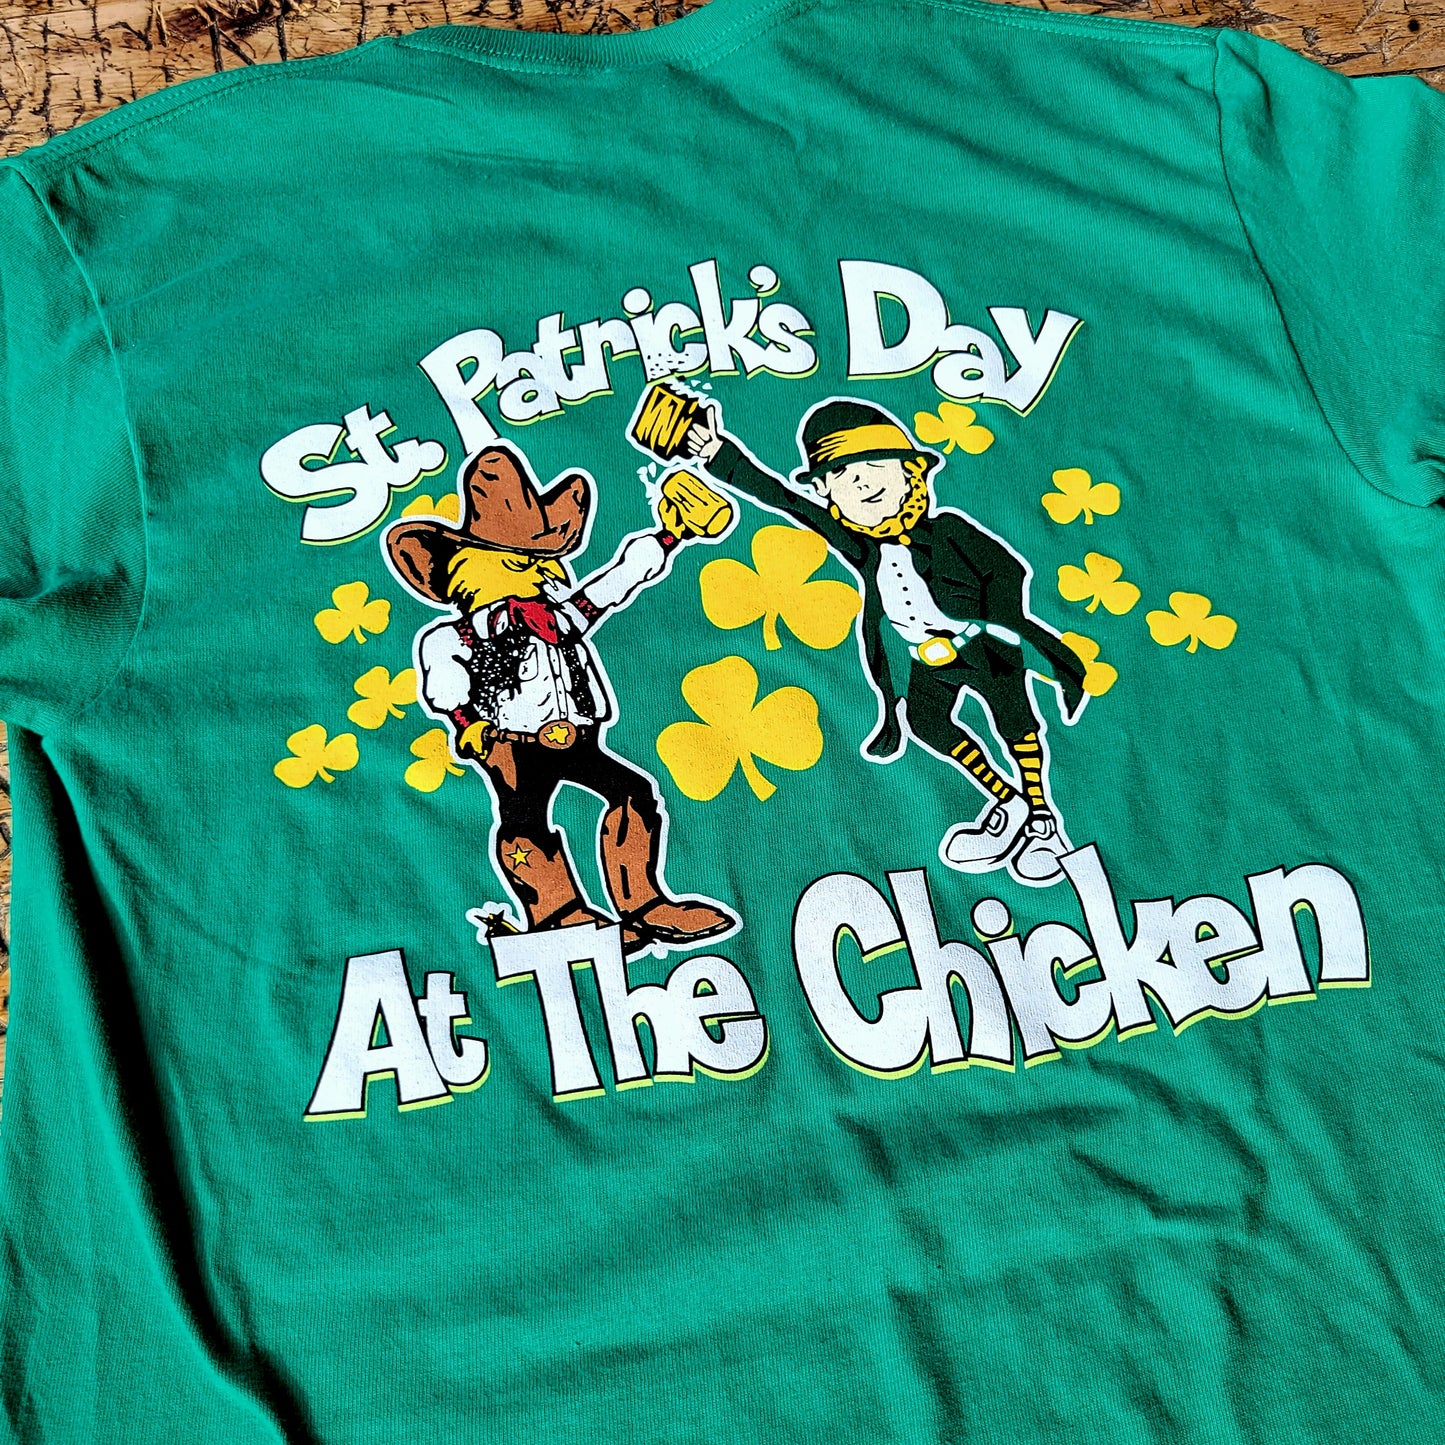 The St. Paddy's